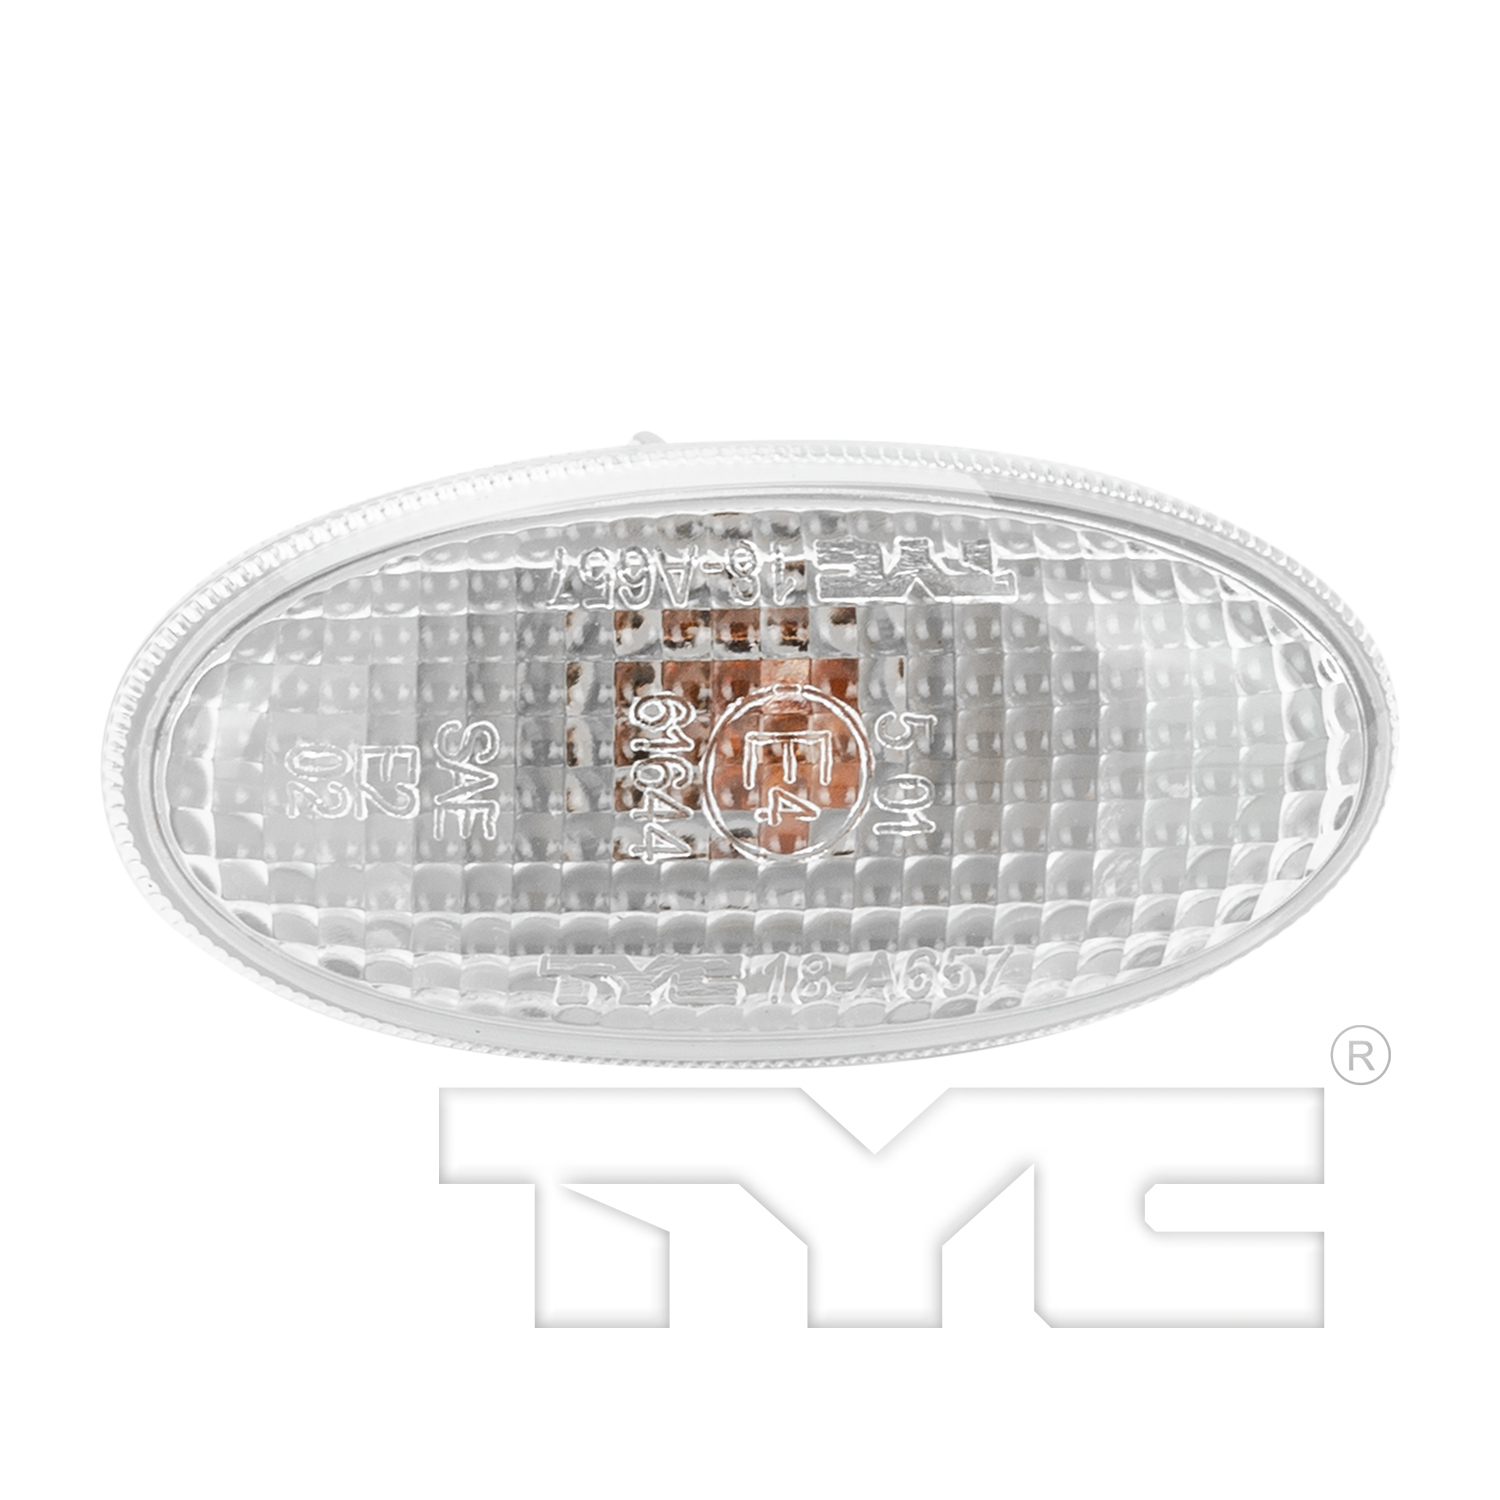 Aftermarket LAMPS for MAZDA - 3, 3,04-09,RT Side repeater lamp